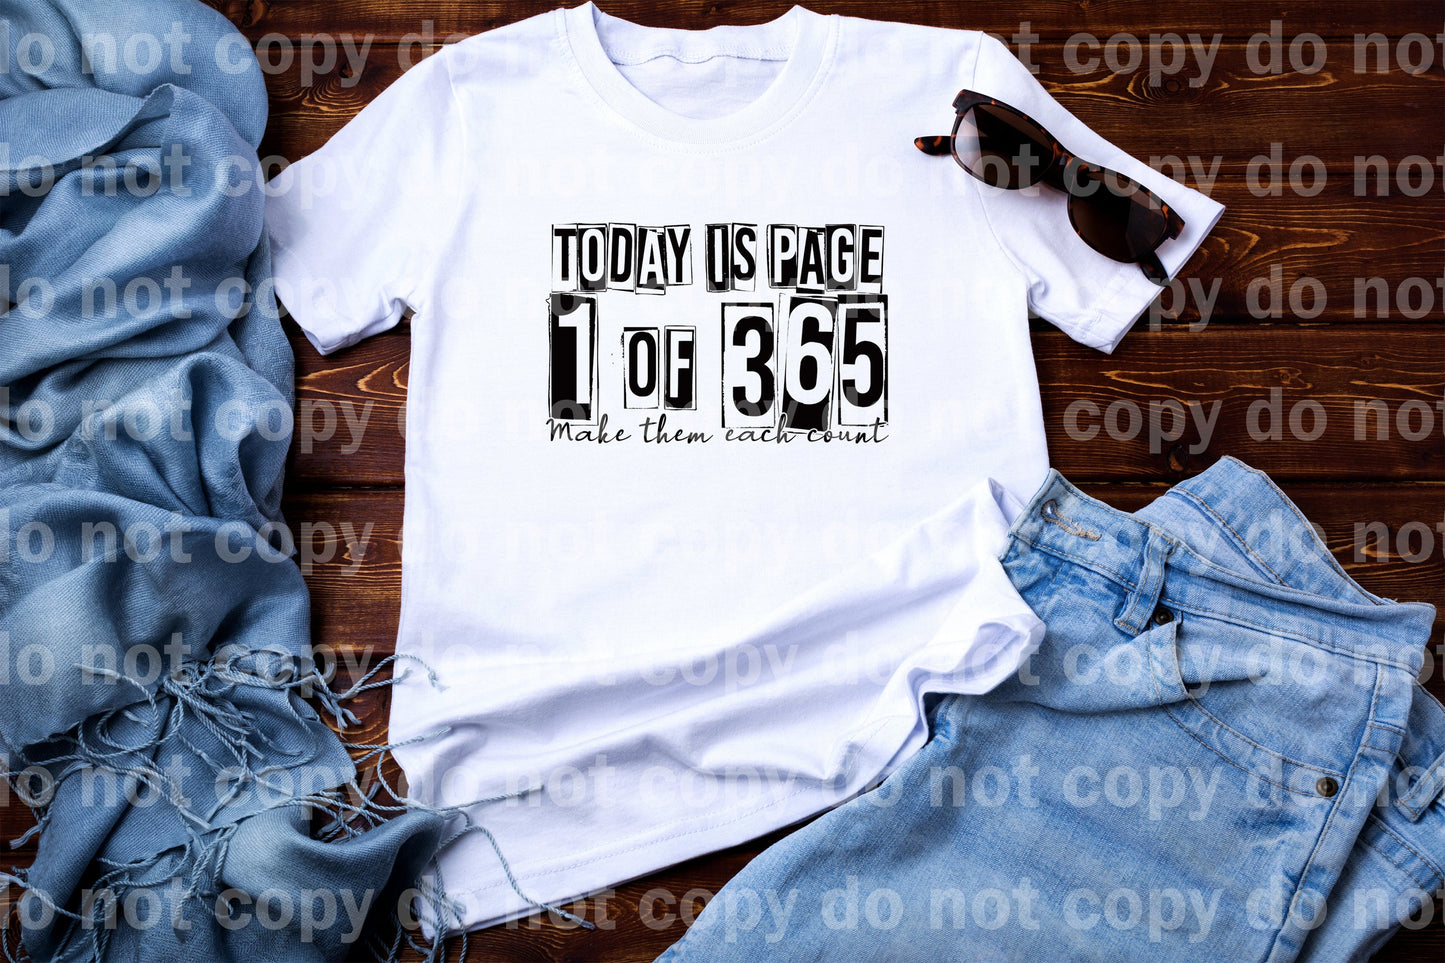 Today Is Page 1 Of 365 Make Them Each Count Dream Print or Sublimation Print